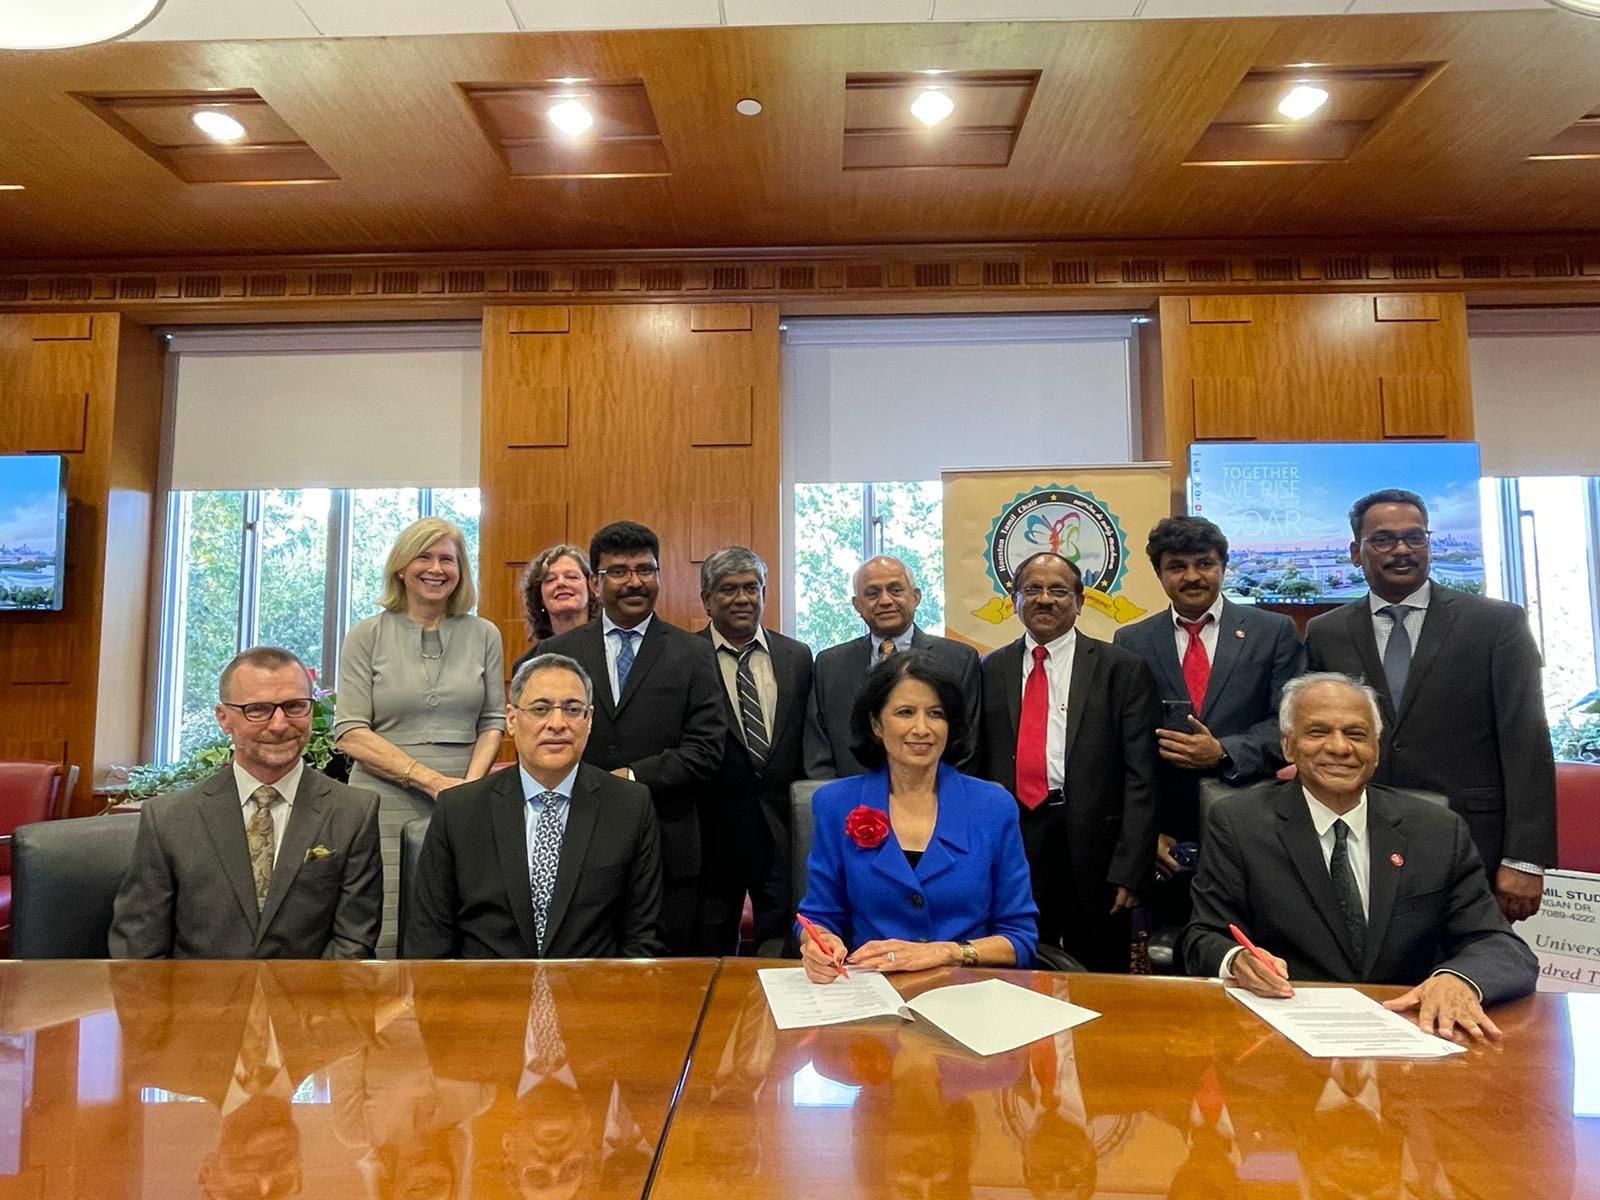 Signing of the agreement to establish the Houston Tamil Studies chair at University of Houston on 11 November 2021